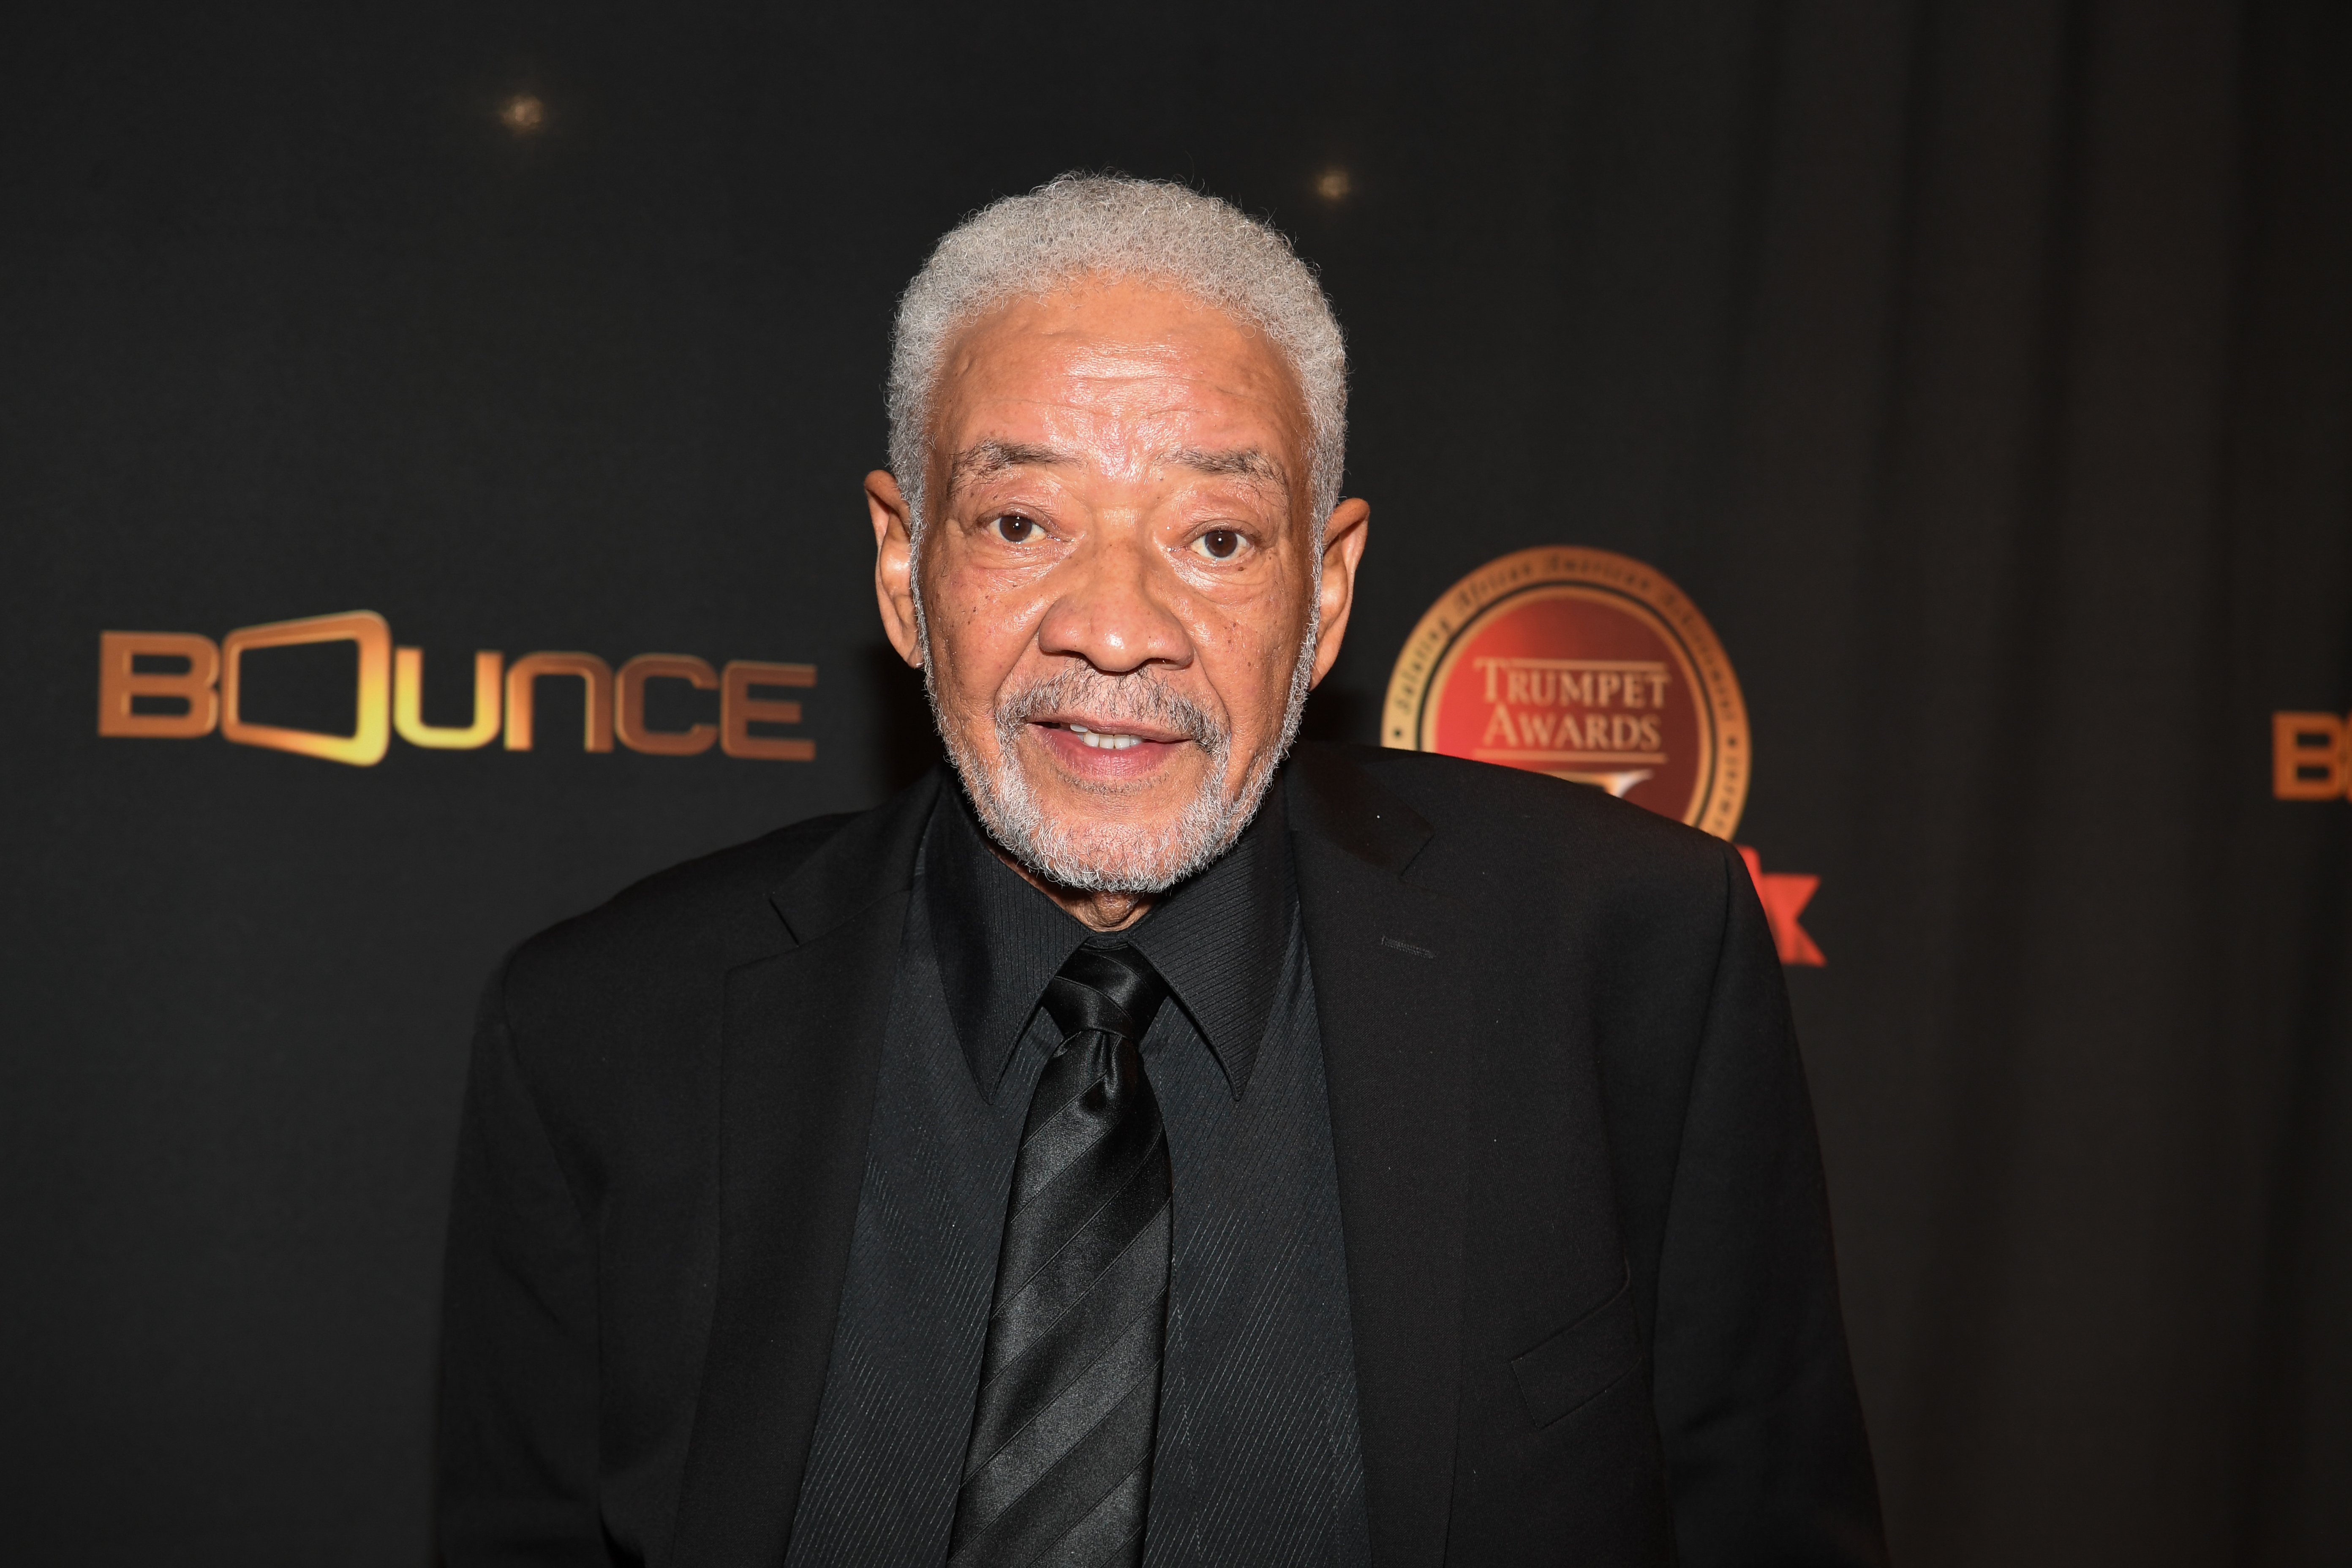 Musician Bill Withers at the 25th Annual Trumpet Awards at Cobb Energy Performing Arts Center in Atlanta, Georgia | Photo: Paras Griffin/Getty Images